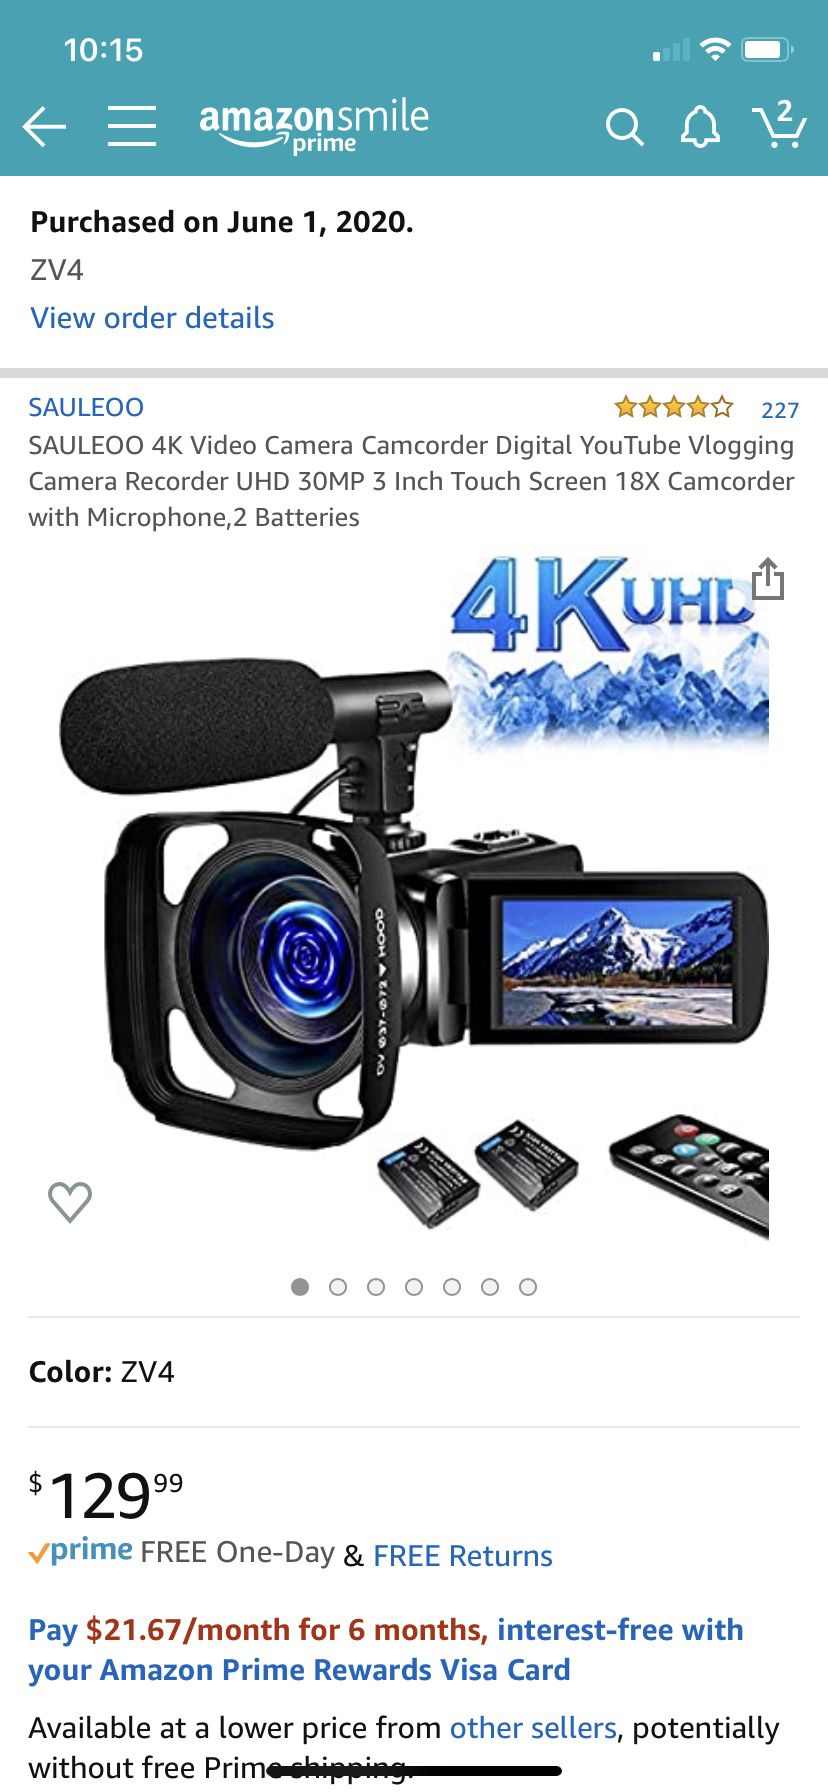 4K Video Camera Camcorder Digital YouTube Vlogging Camera Recorder UHD 30MP 3 Inch Touch Screen 18X Camcorder with Microphone,2 Batteries